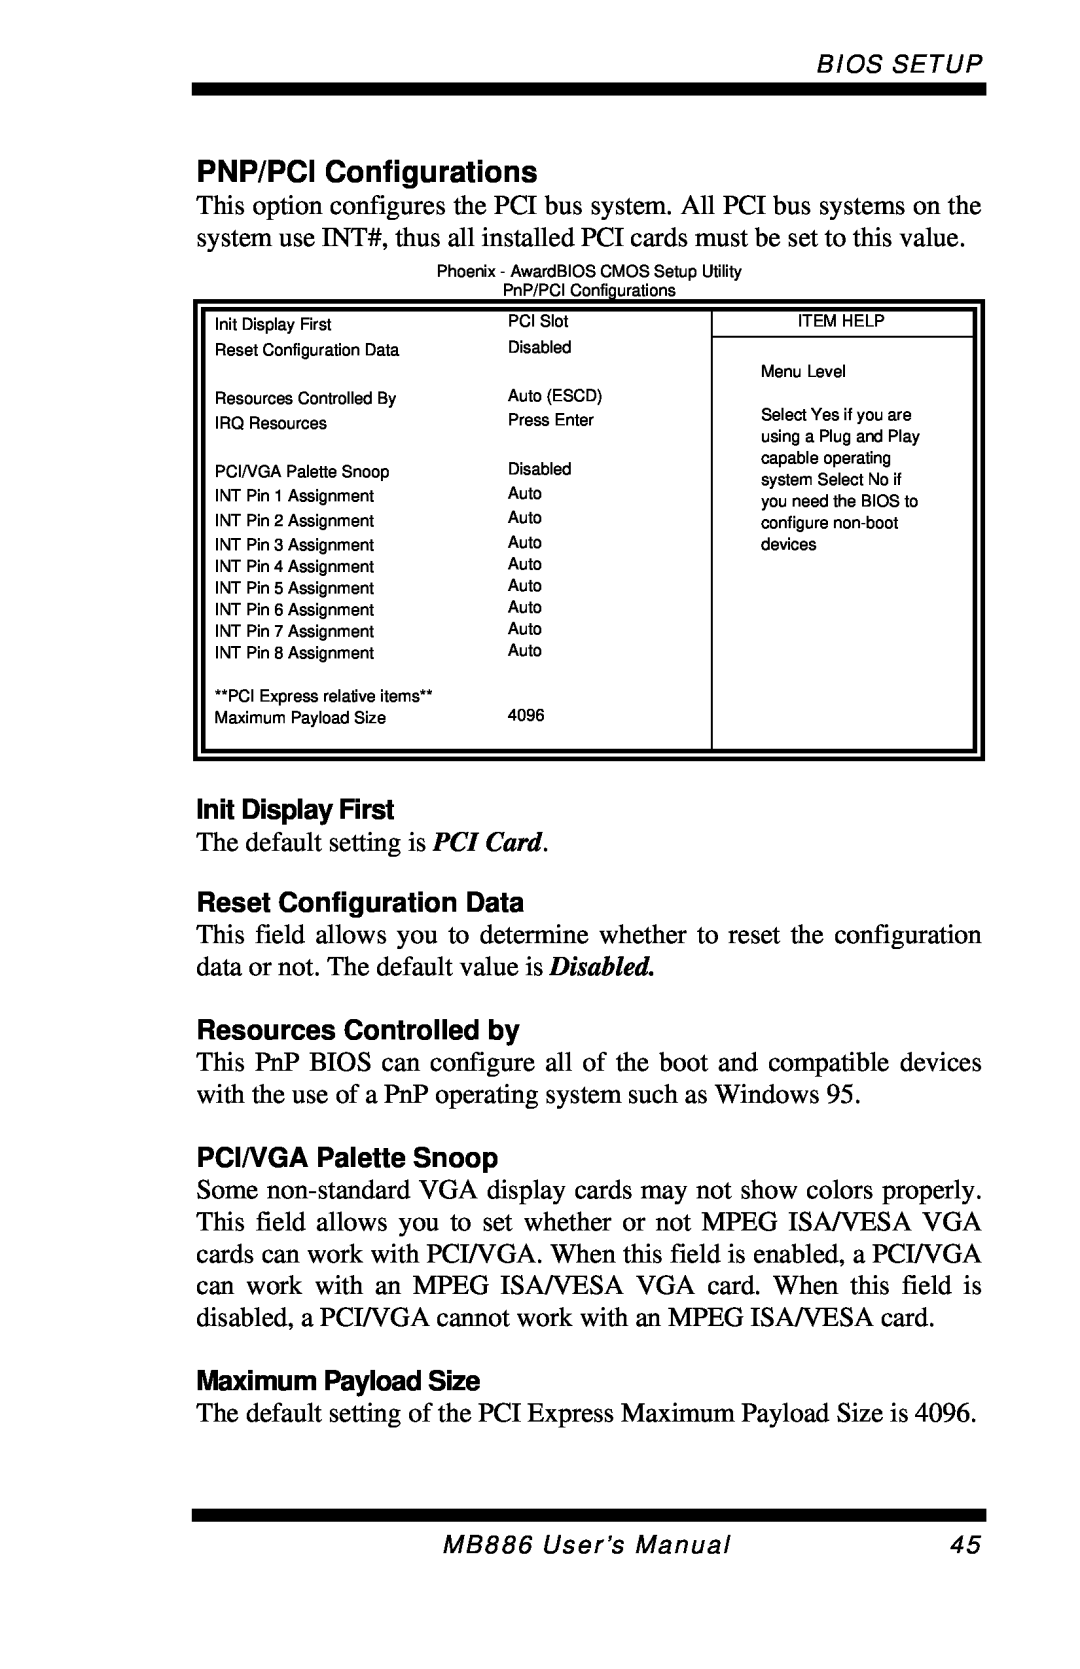 Intel MB886 user manual PNP/PCI Configurations, Init Display First, Reset Configuration Data, Resources Controlled by 